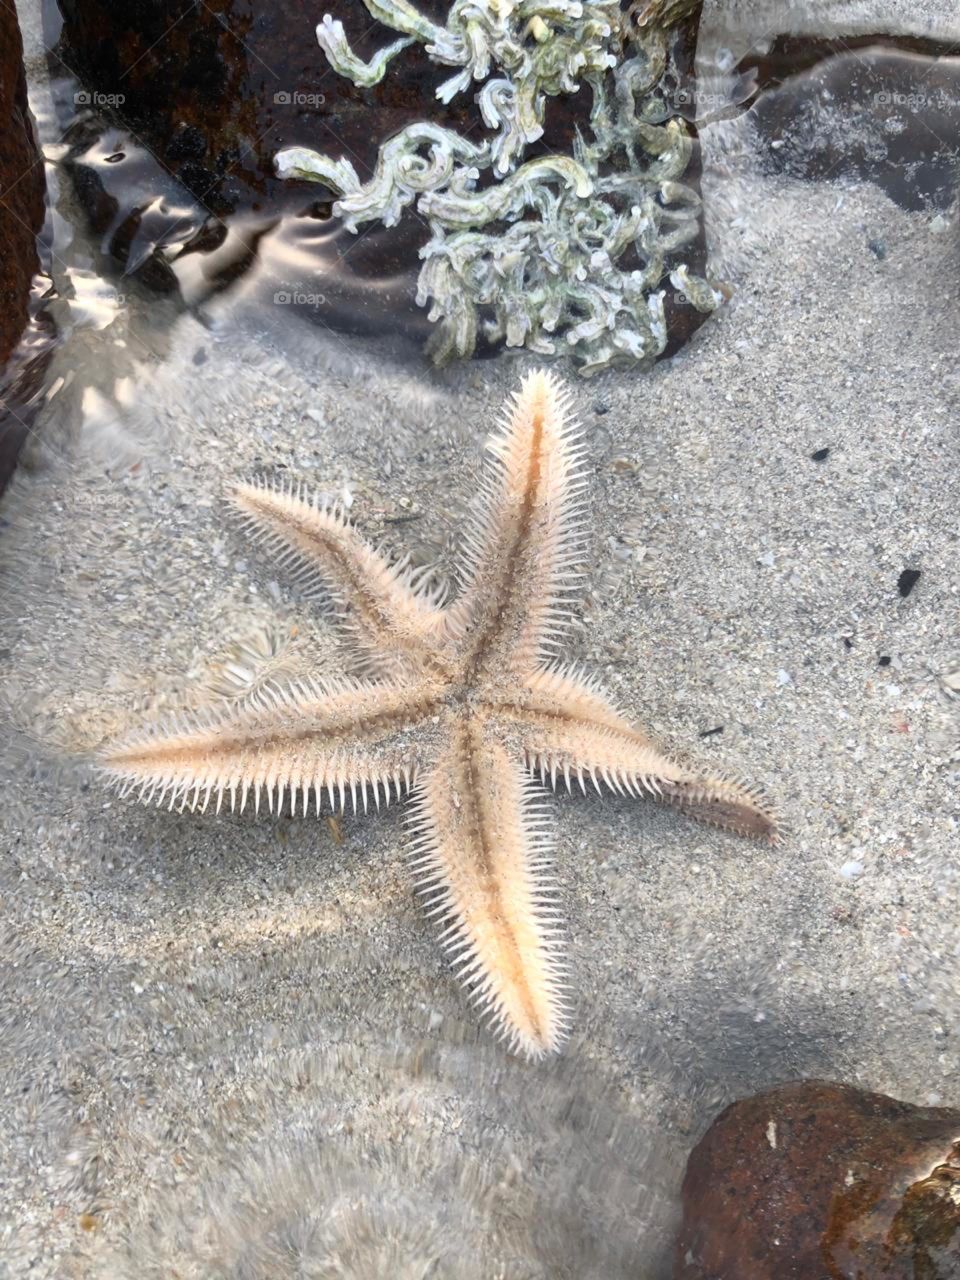 Beautiful starfish found on the shore and reunited with the sea where it belongs. 